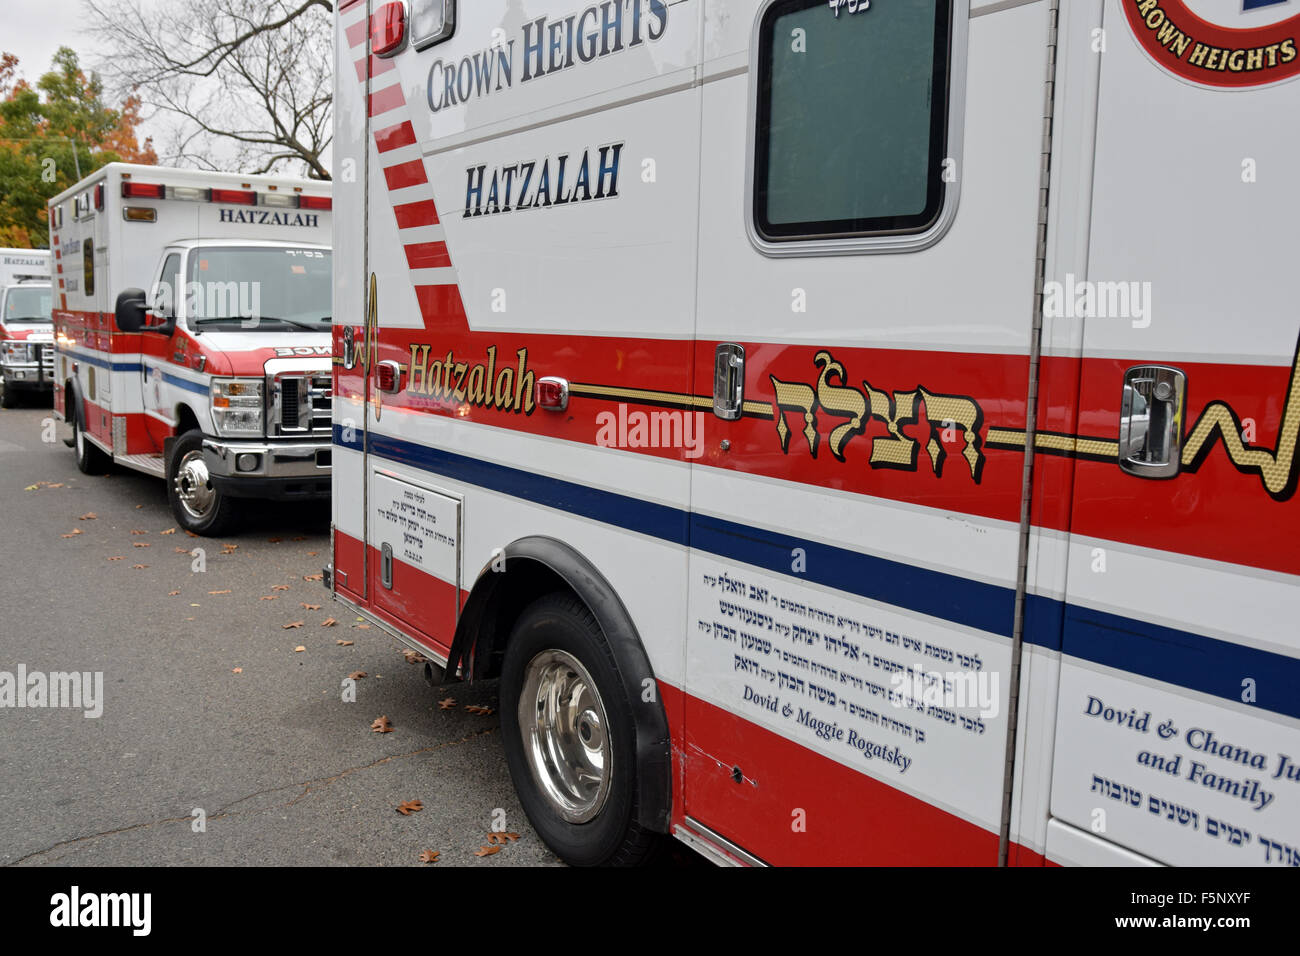 Crown Heights Hatzalah ambulanze schierate in Eastern Parkway a Brooklyn, New York Foto Stock